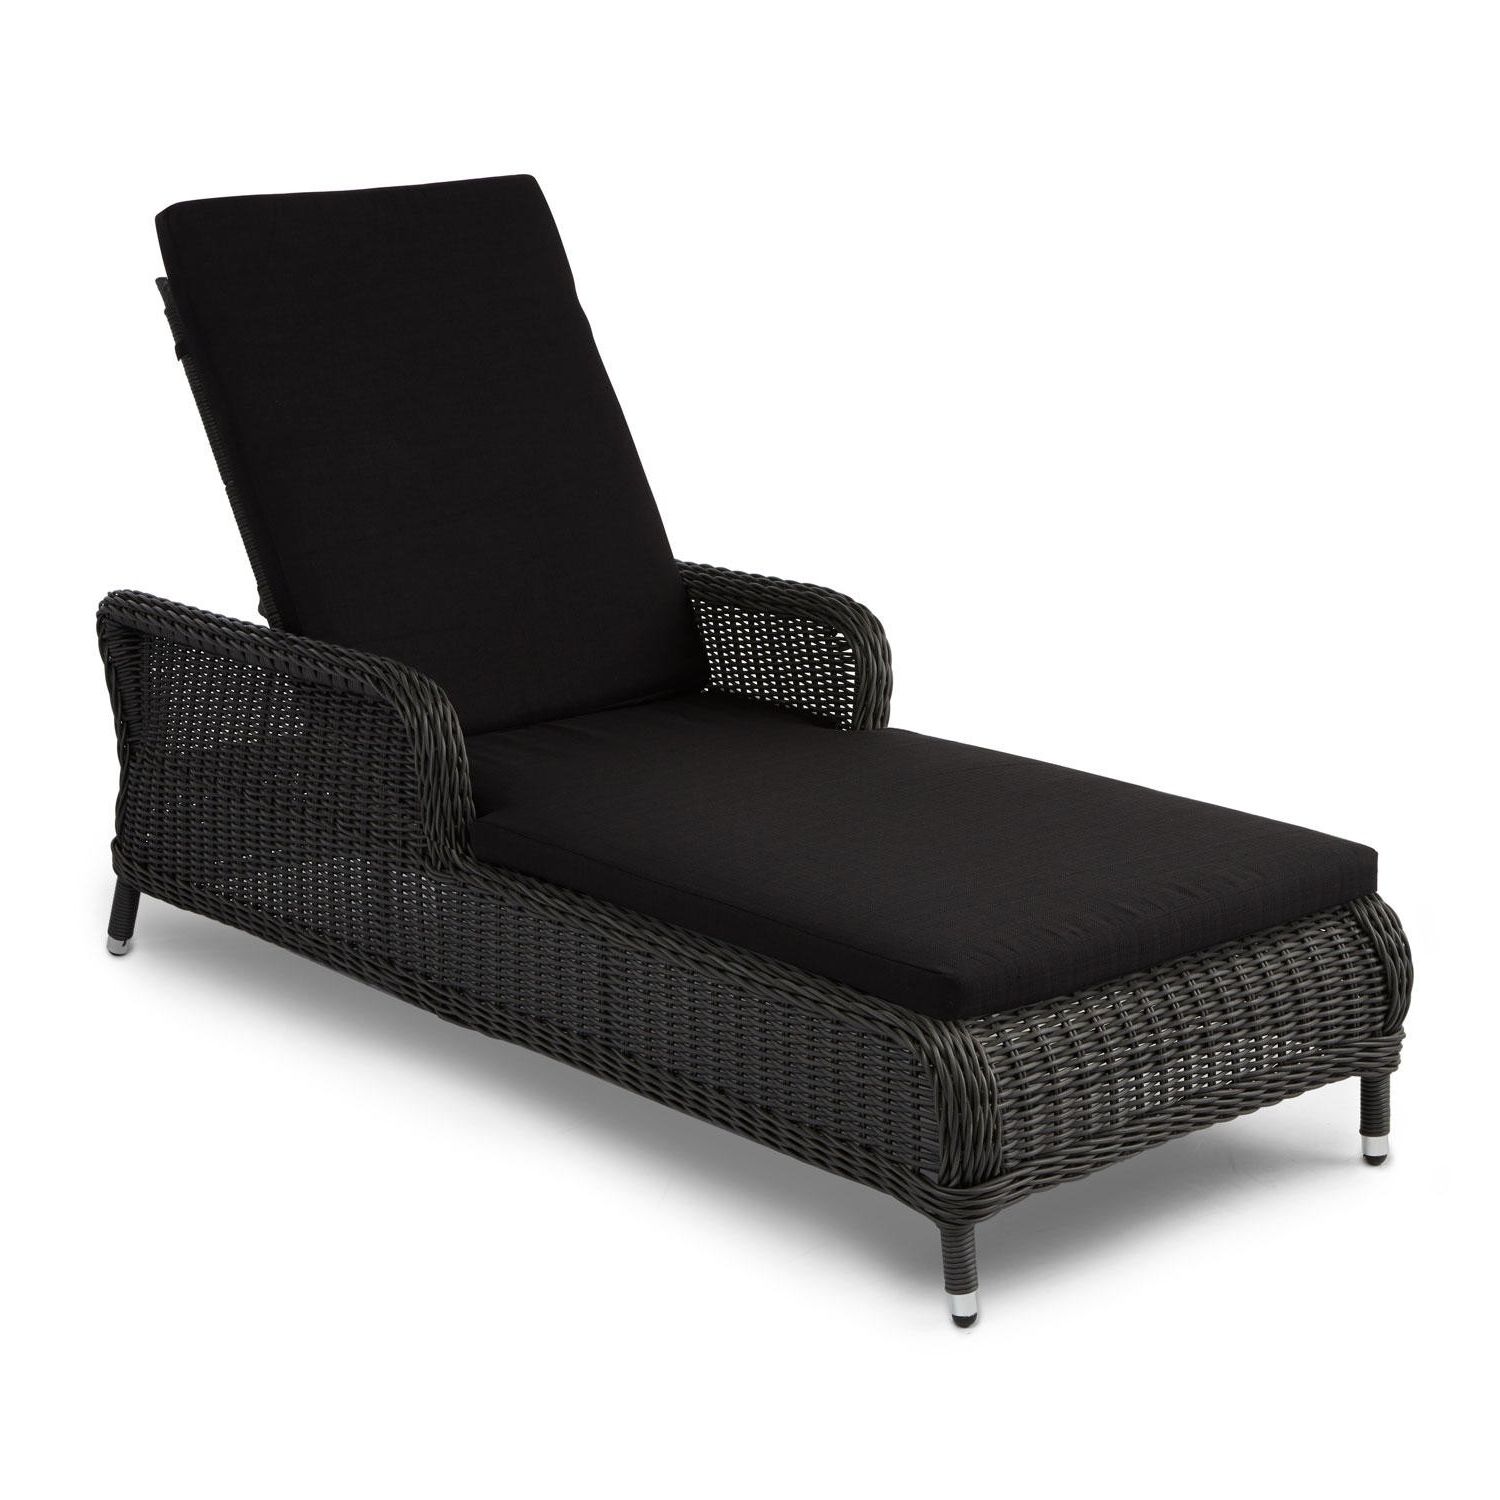 Black Chaise Lounge Chairs • Lounge Chairs Ideas Regarding Well Known Boca Chaise Lounge Outdoor Chairs With Pillows (View 8 of 15)